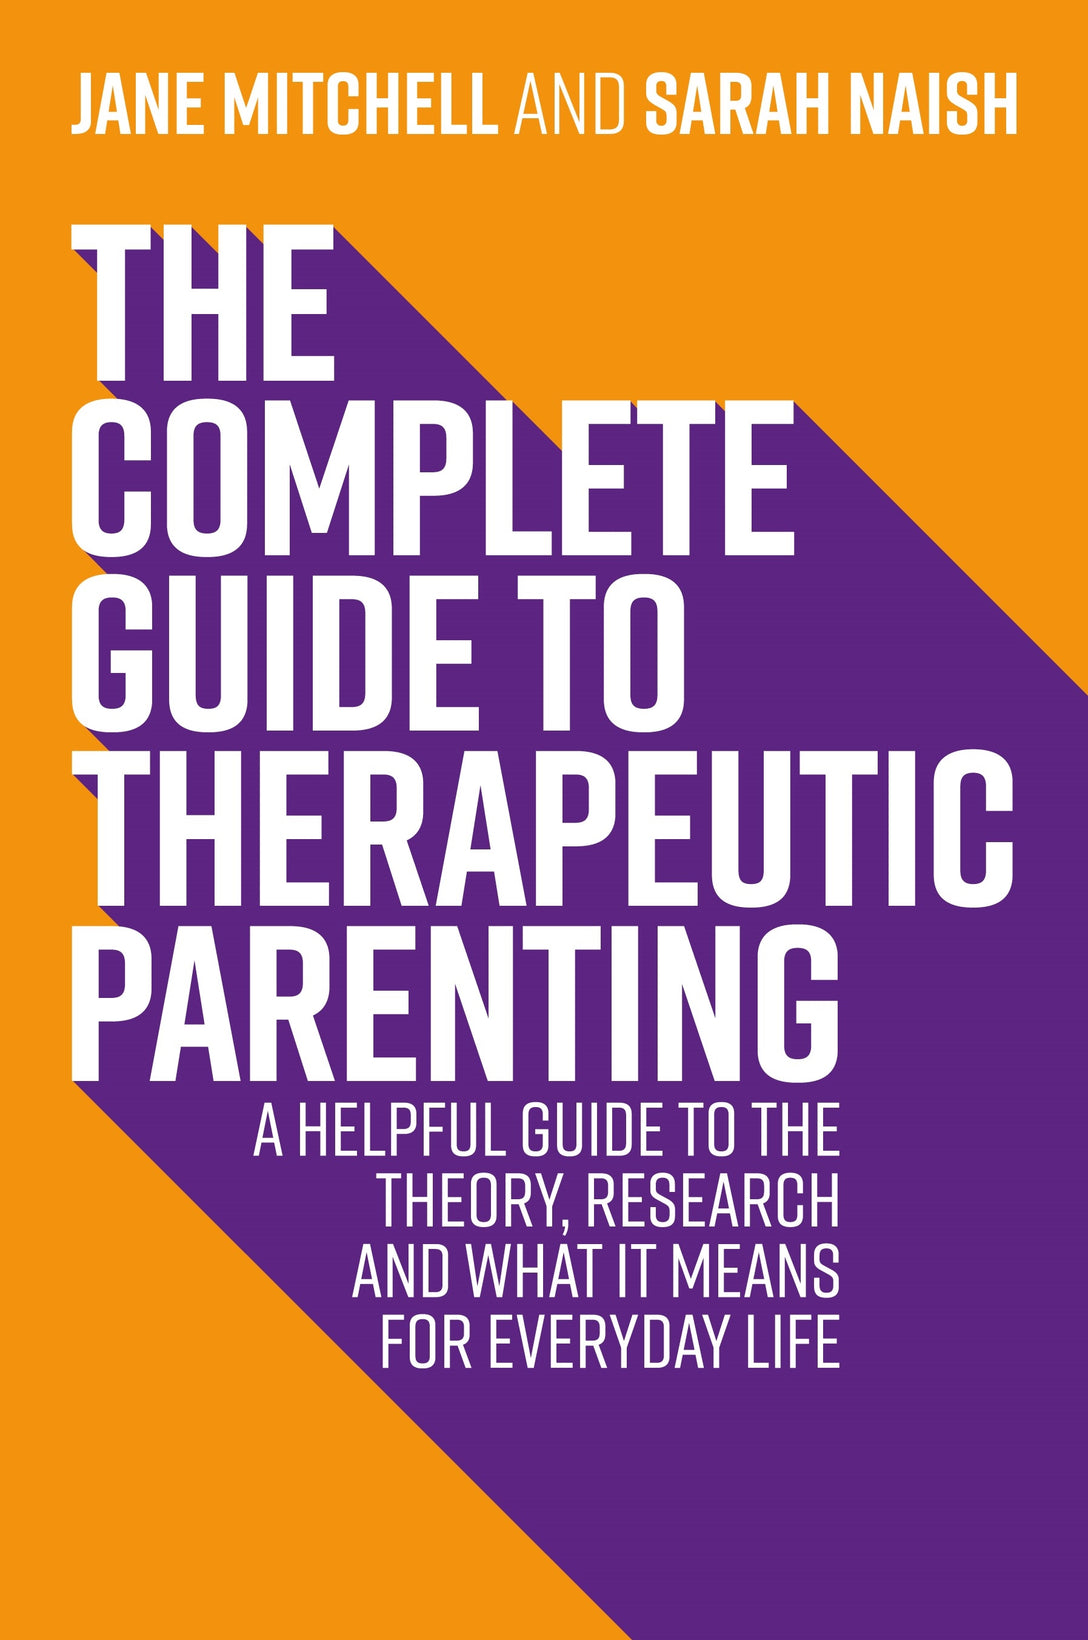 The Complete Guide to Therapeutic Parenting by Sarah Naish, Jane Mitchell